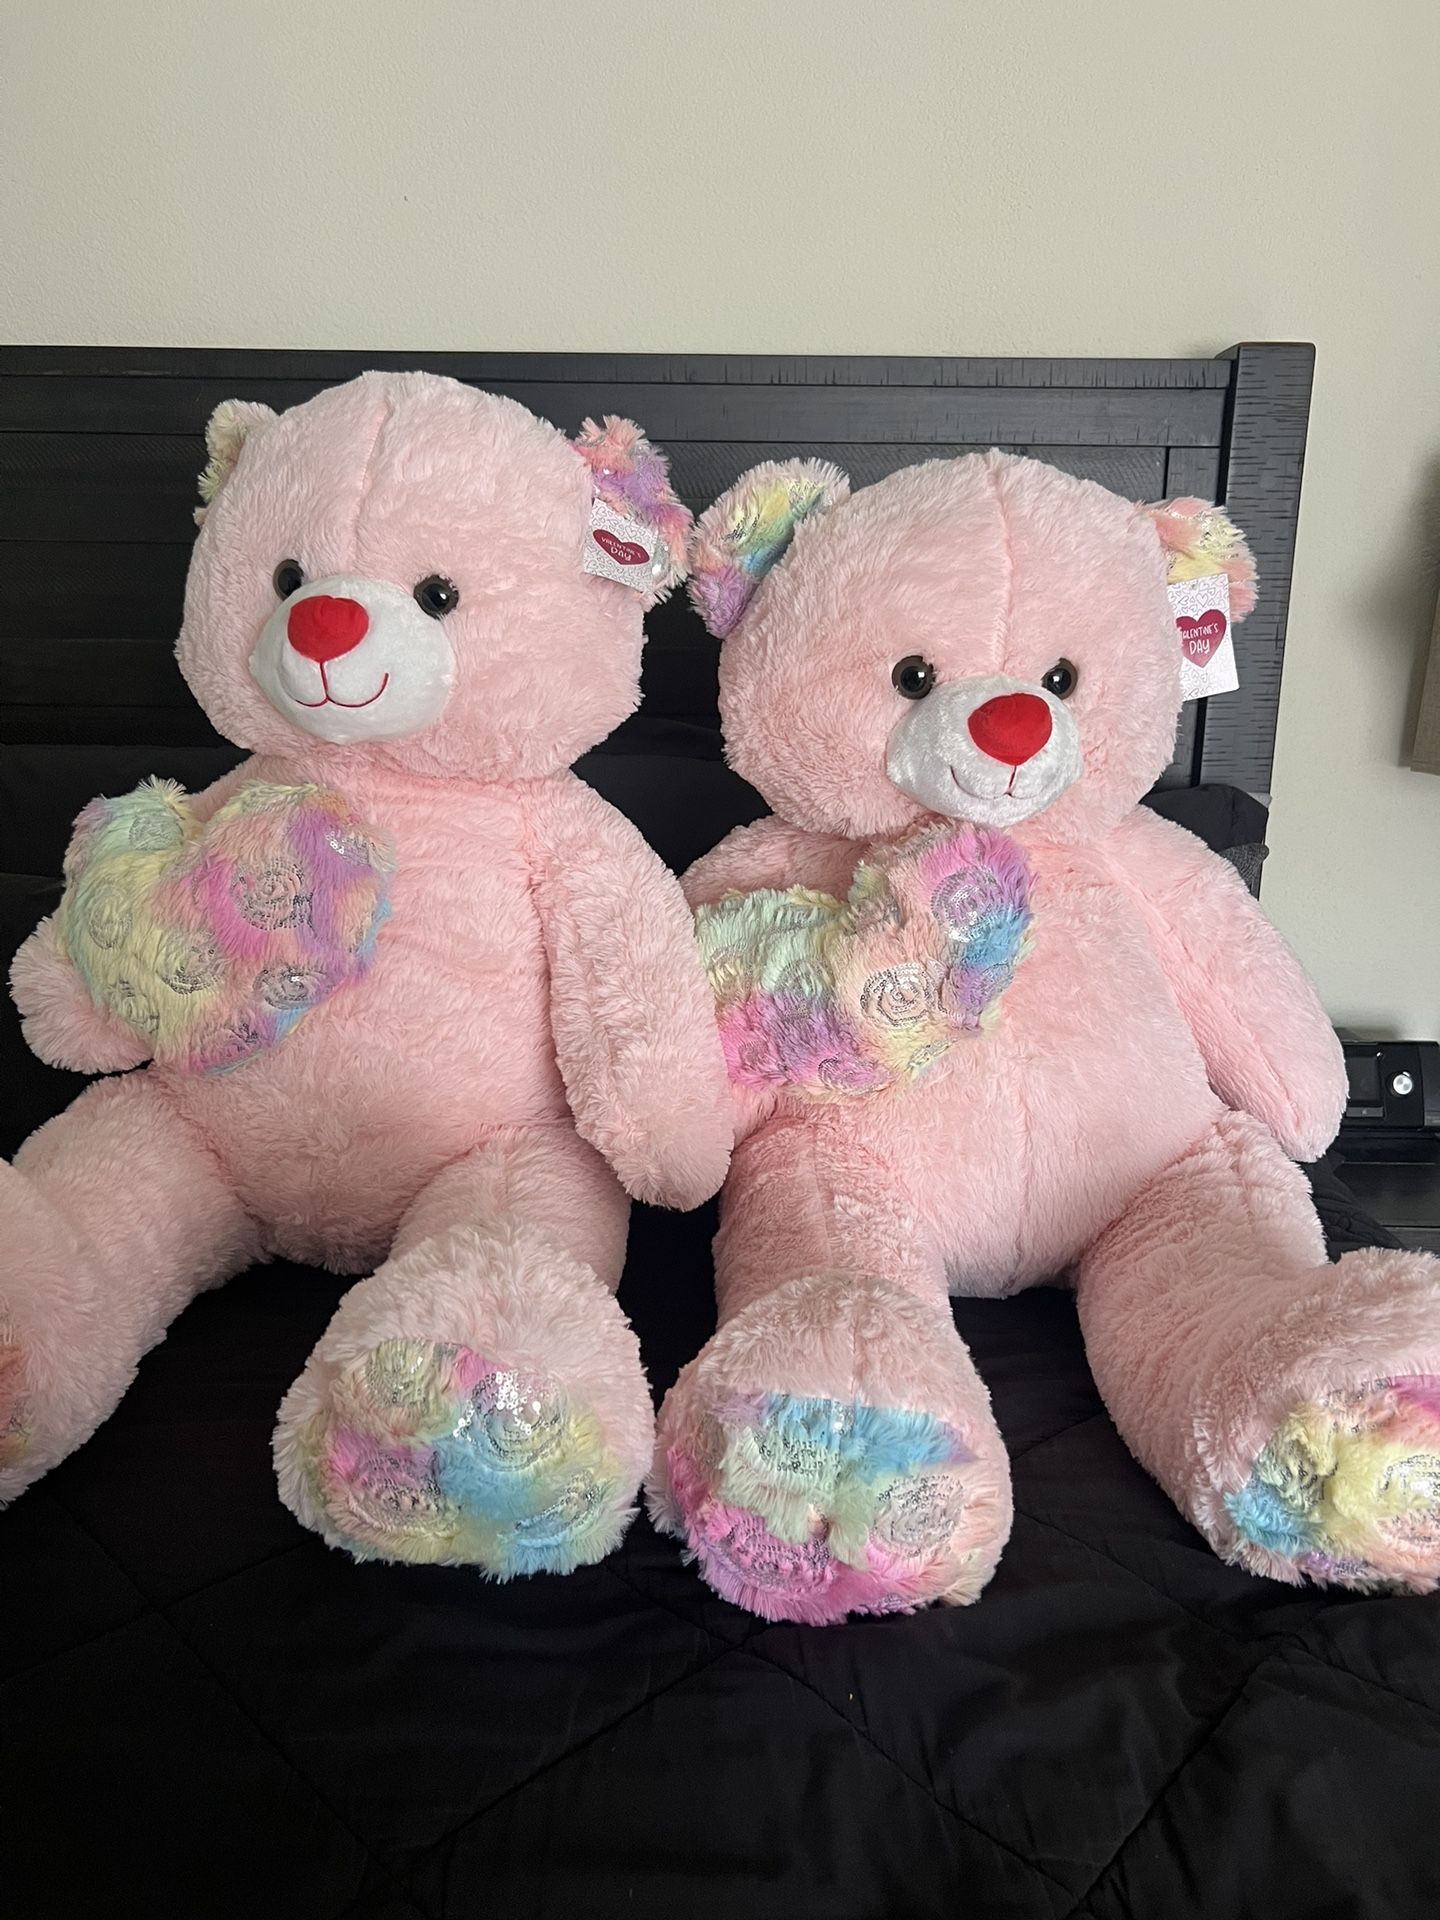 Giant Pink Teddy Bear 3.4 Feet I Have 3 Of Them Each Is $10 